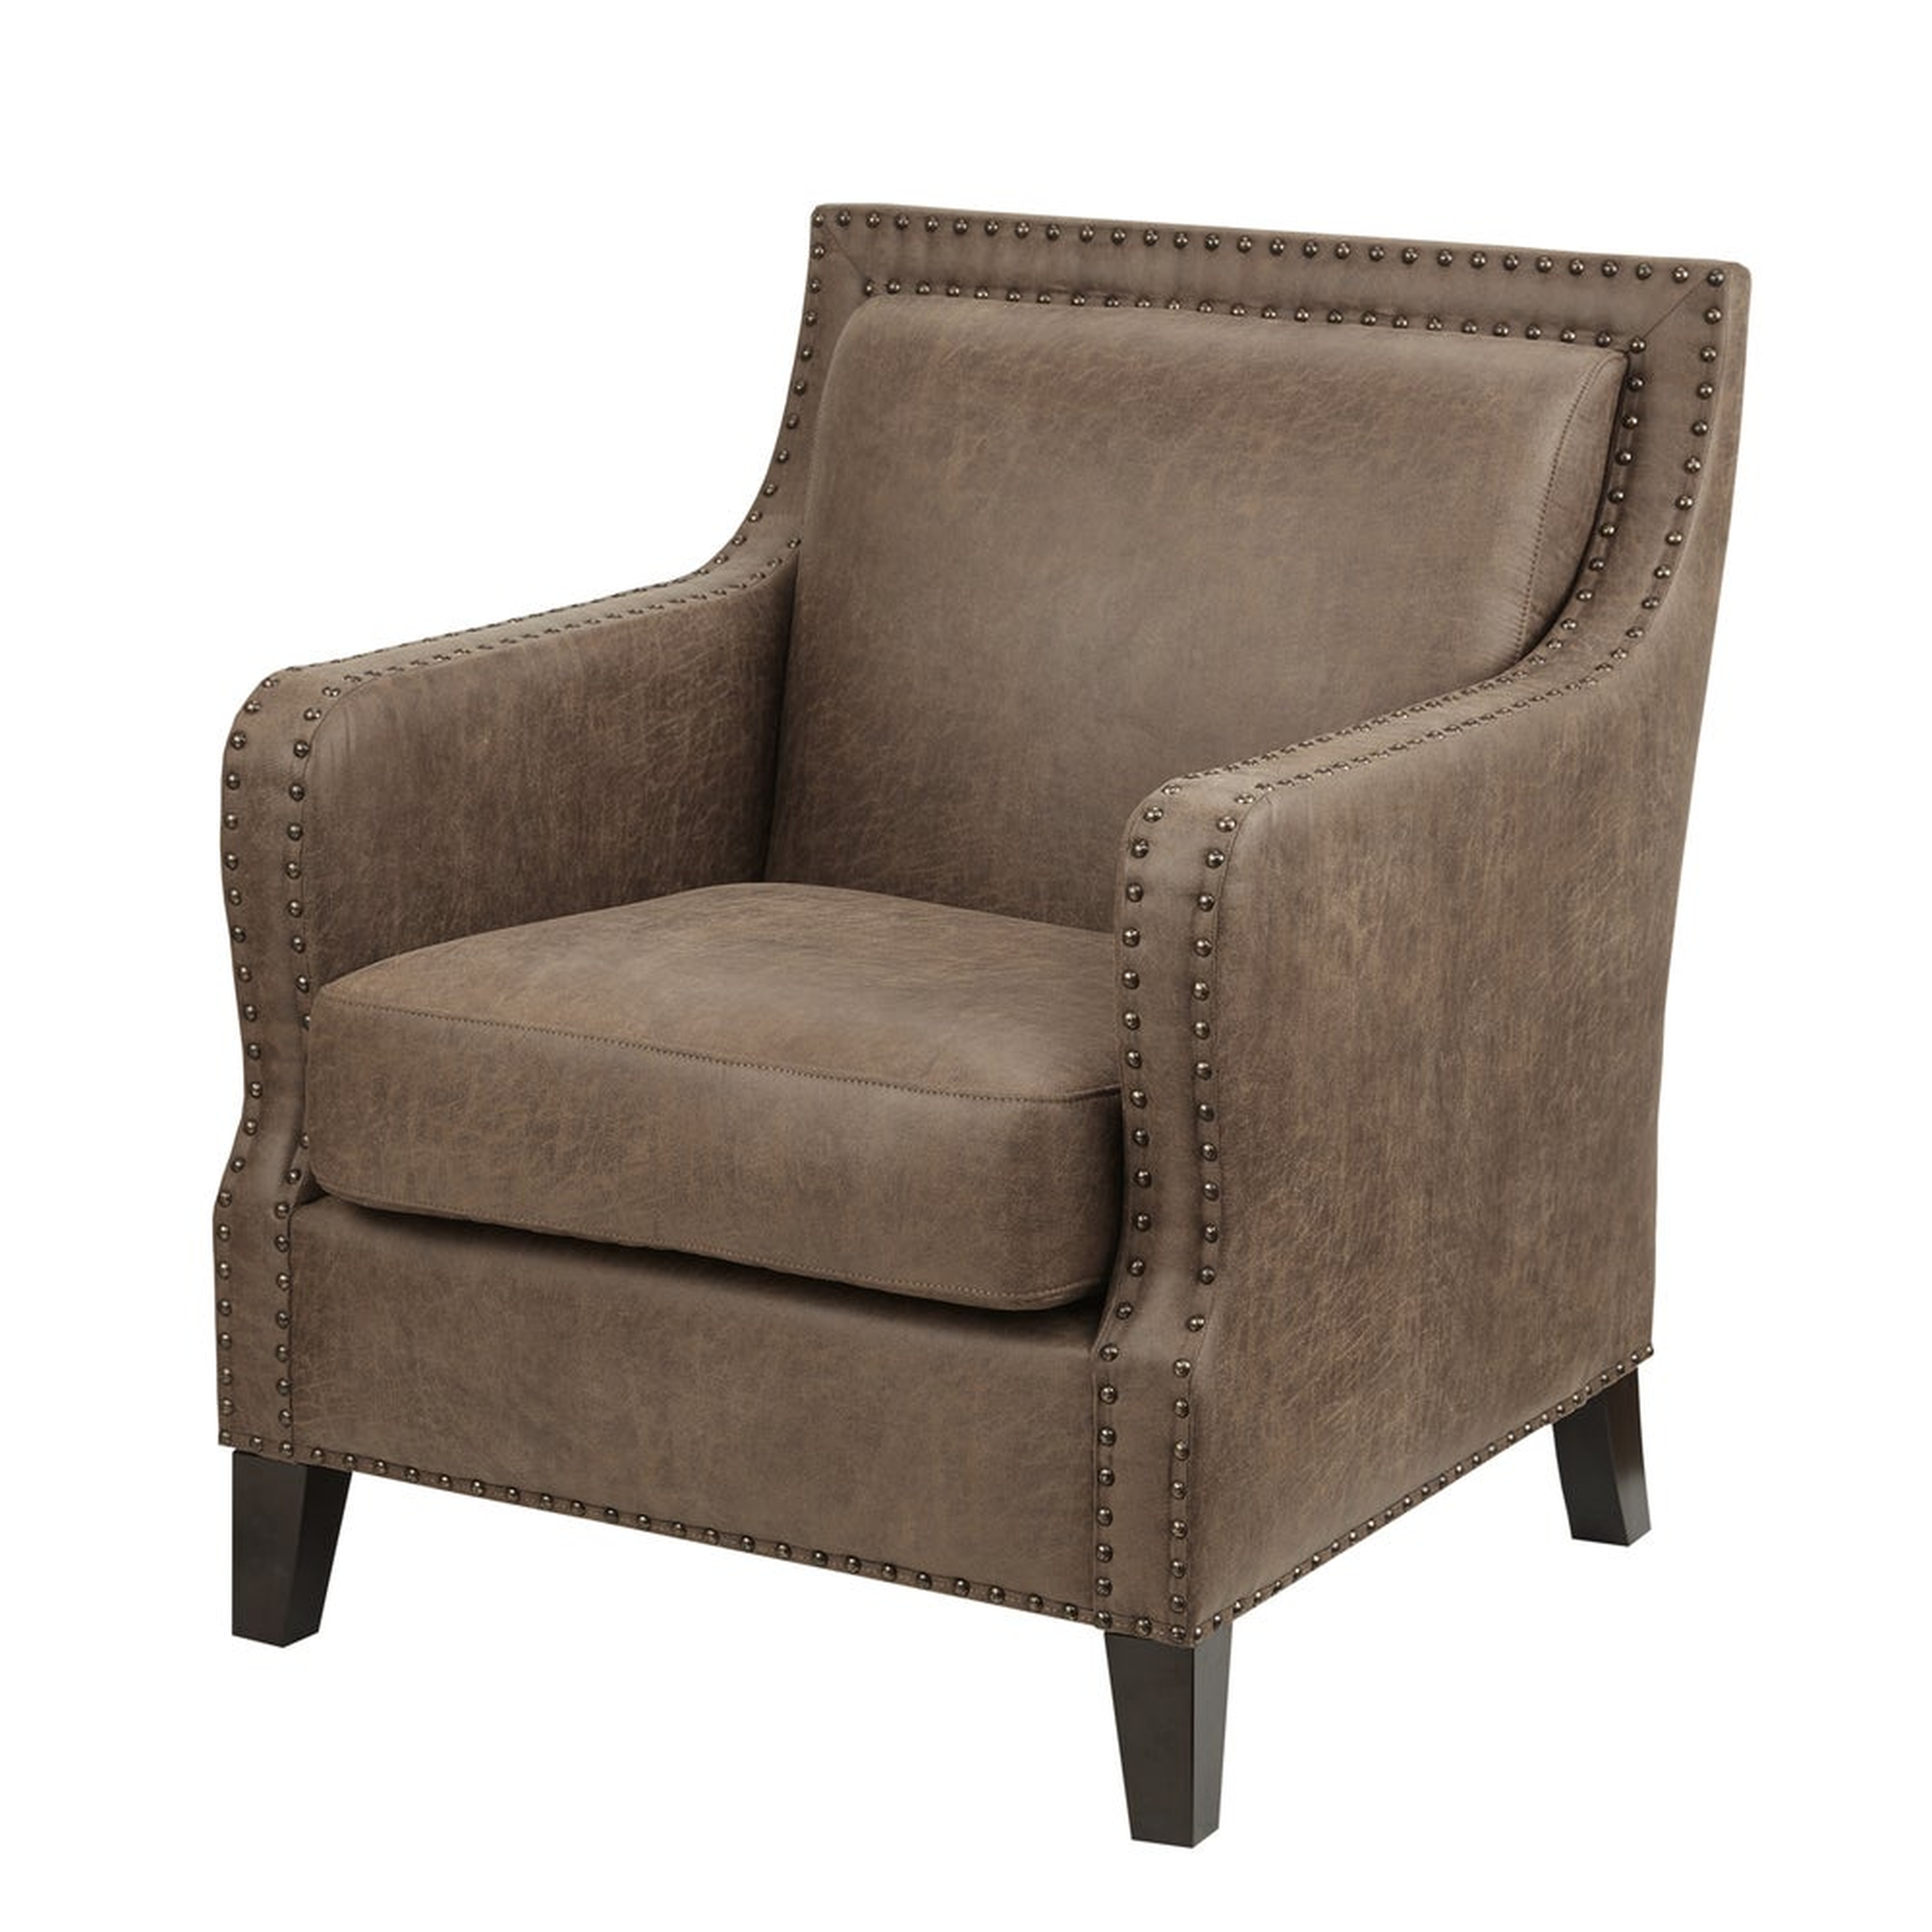 Copper Grove Kucove Brown Faux Leather Accent Chair - Overstock